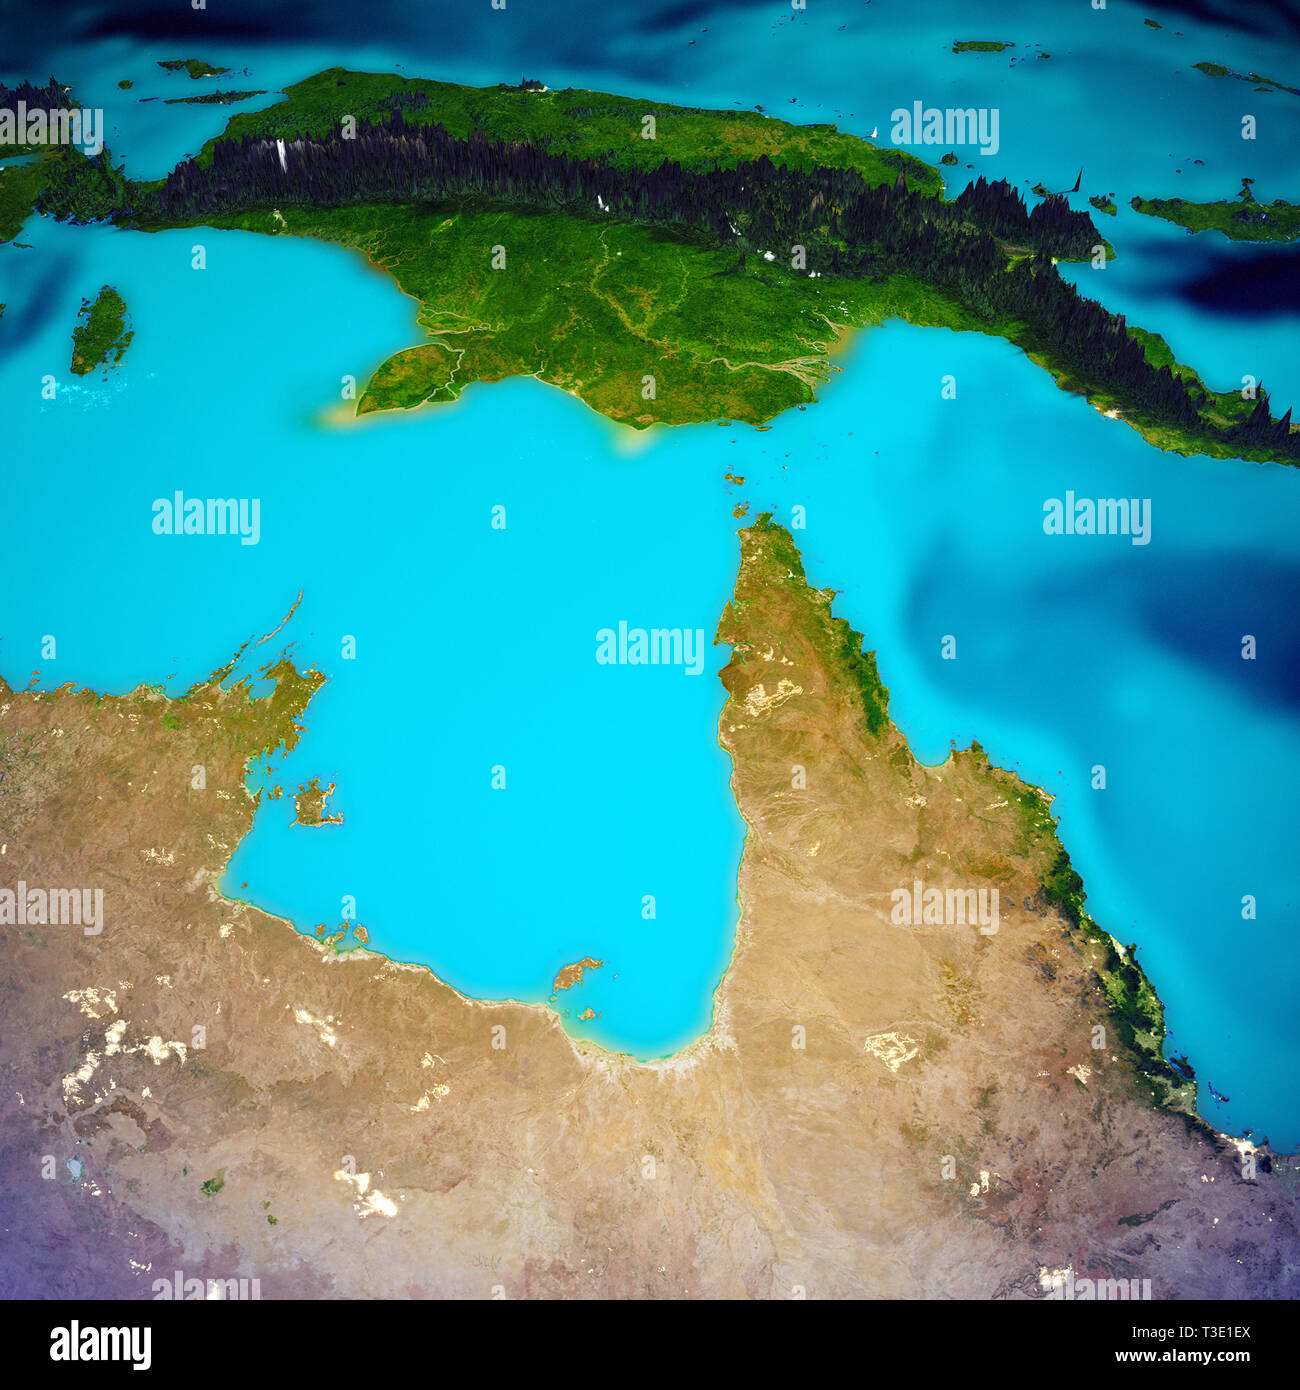 North Australia and Papua New Guinea island map. Elements of this image furnished by NASA. 3d rendering Stock Photo